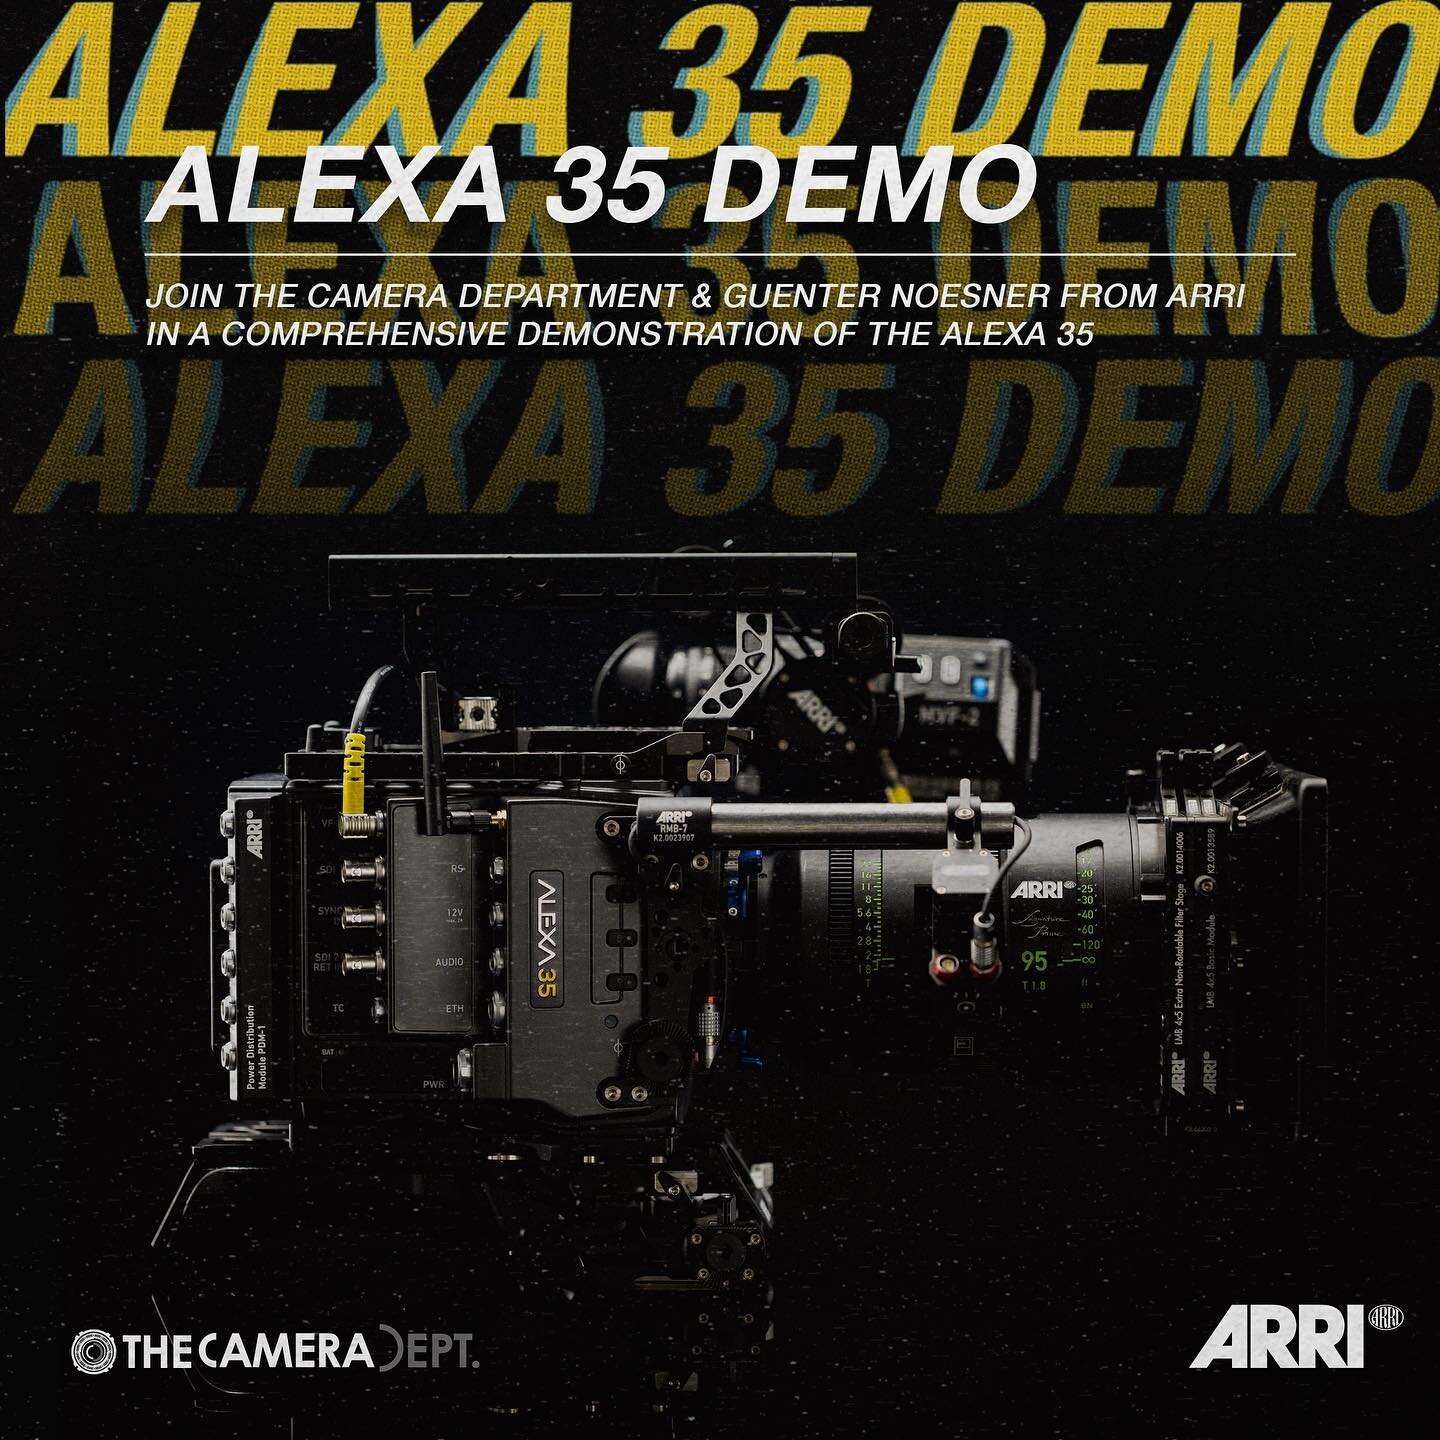 We&rsquo;re excited to have two upcoming demos of the Alexa 35 in our spaces.
.
Don&rsquo;t miss the chance to get a hands of experience with Arri&rsquo;s latest camera system.
.
👉 swipe for dates and times, and leave a comment if you&rsquo;re think